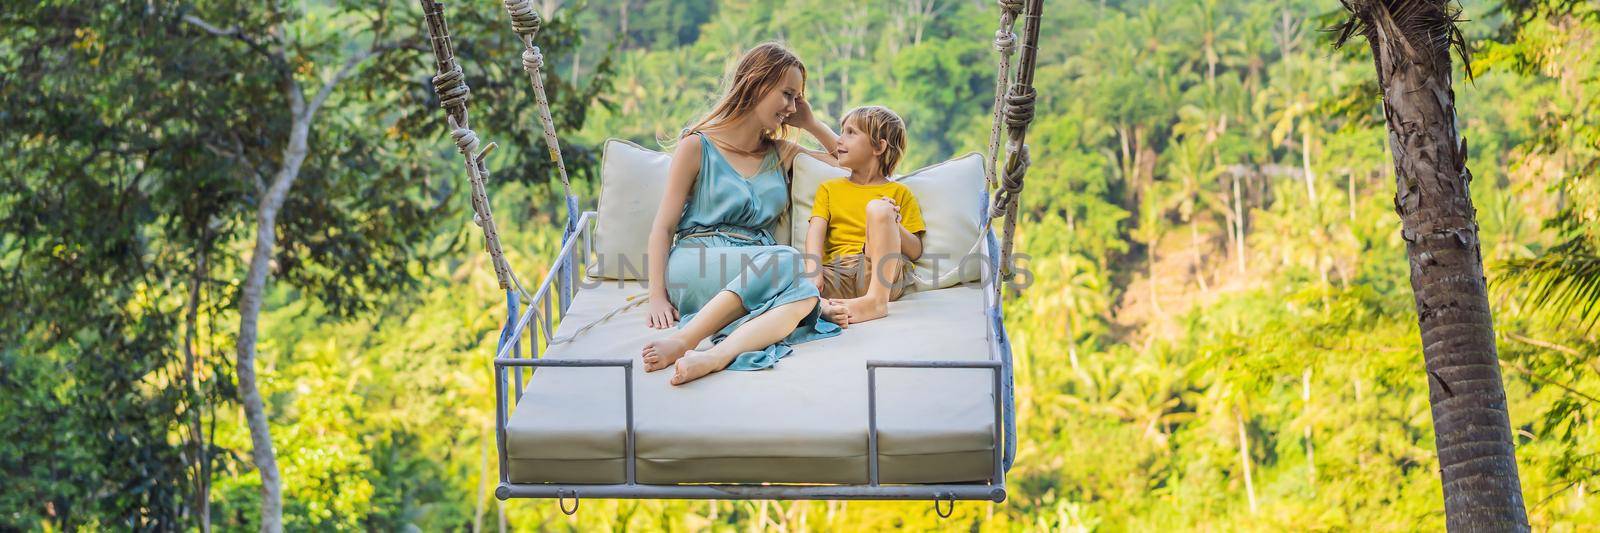 BANNER, LONG FORMAT Mother and son swinging in the jungle rainforest of Bali island, Indonesia. Swing in the tropics. Swings - trend of Bali. Traveling with kids concept. What to do with children. Child friendly place by galitskaya